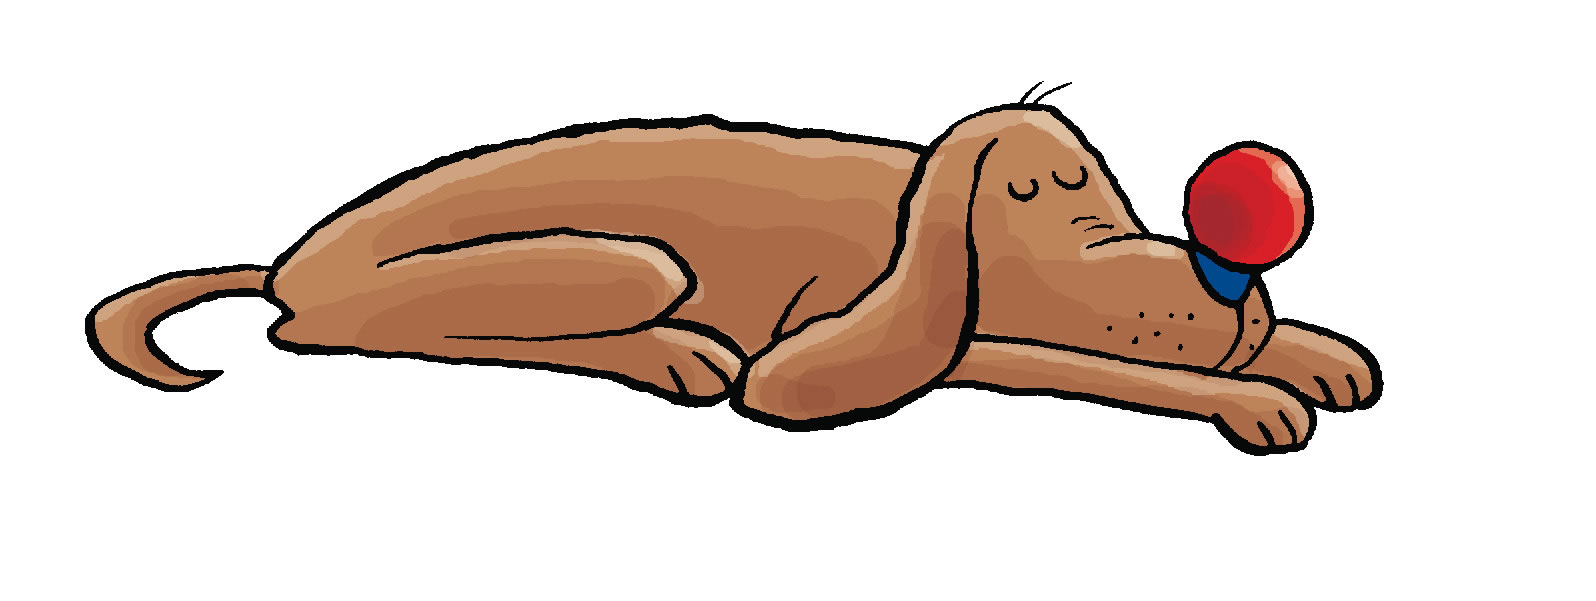 dog obedience clipart - photo #20